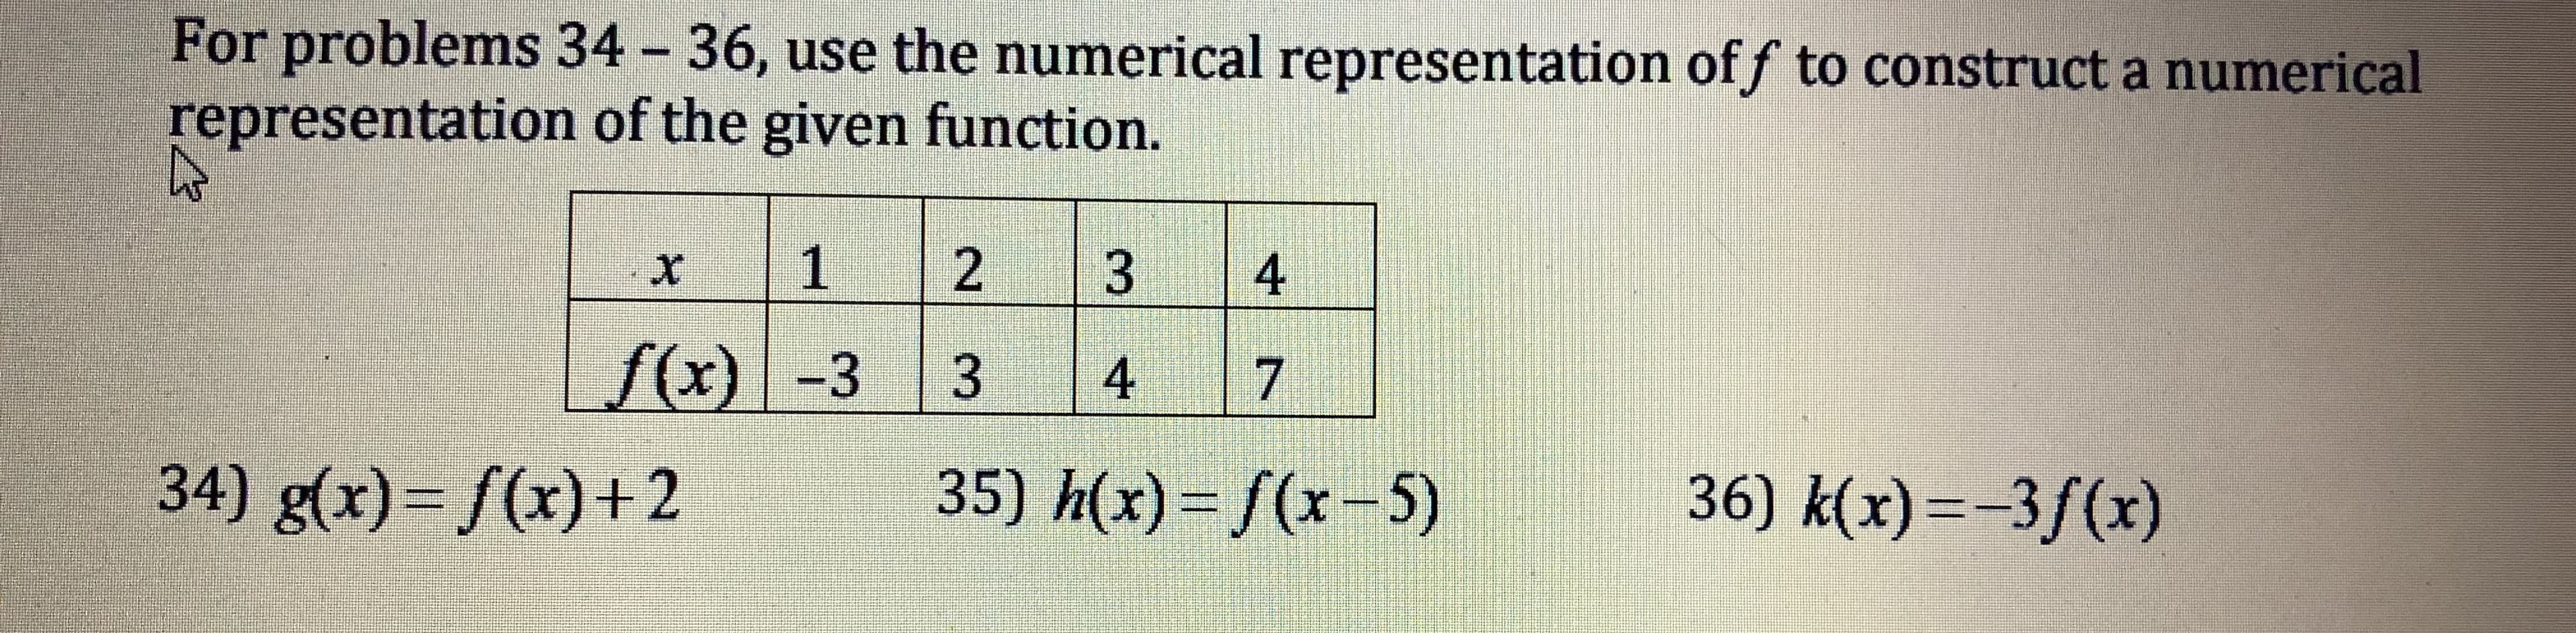 For problems 34 -36, use the numerical representation of f to construct a numerical
representation of the given function.
34) g(x) /(x)+2
35) h(x)-/(x -5)
36) k(x)--3f(x)
